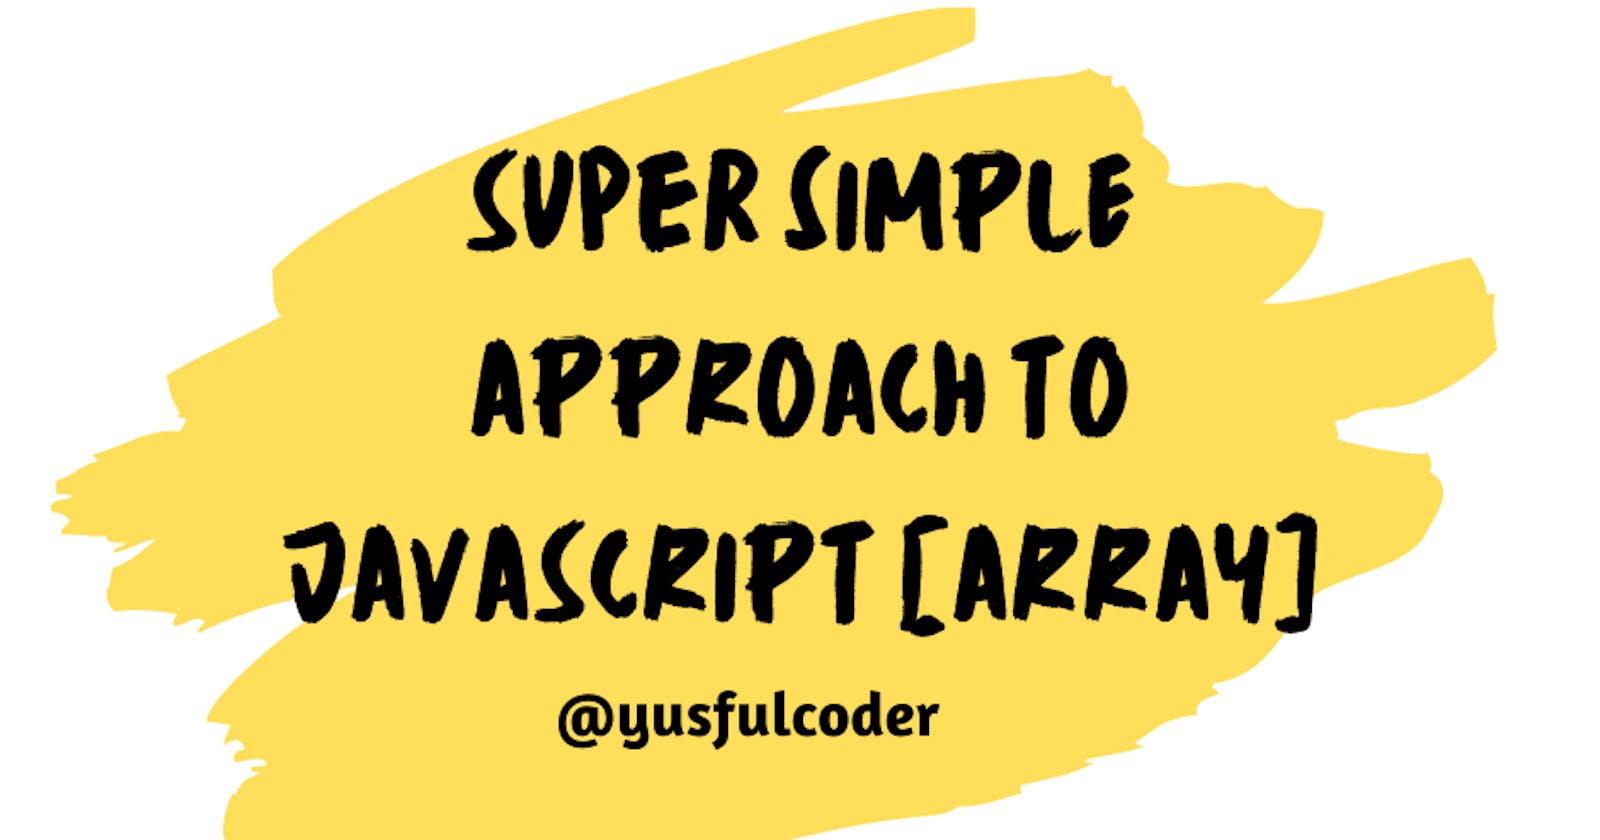 Super Simple Approach to JavaScript Array